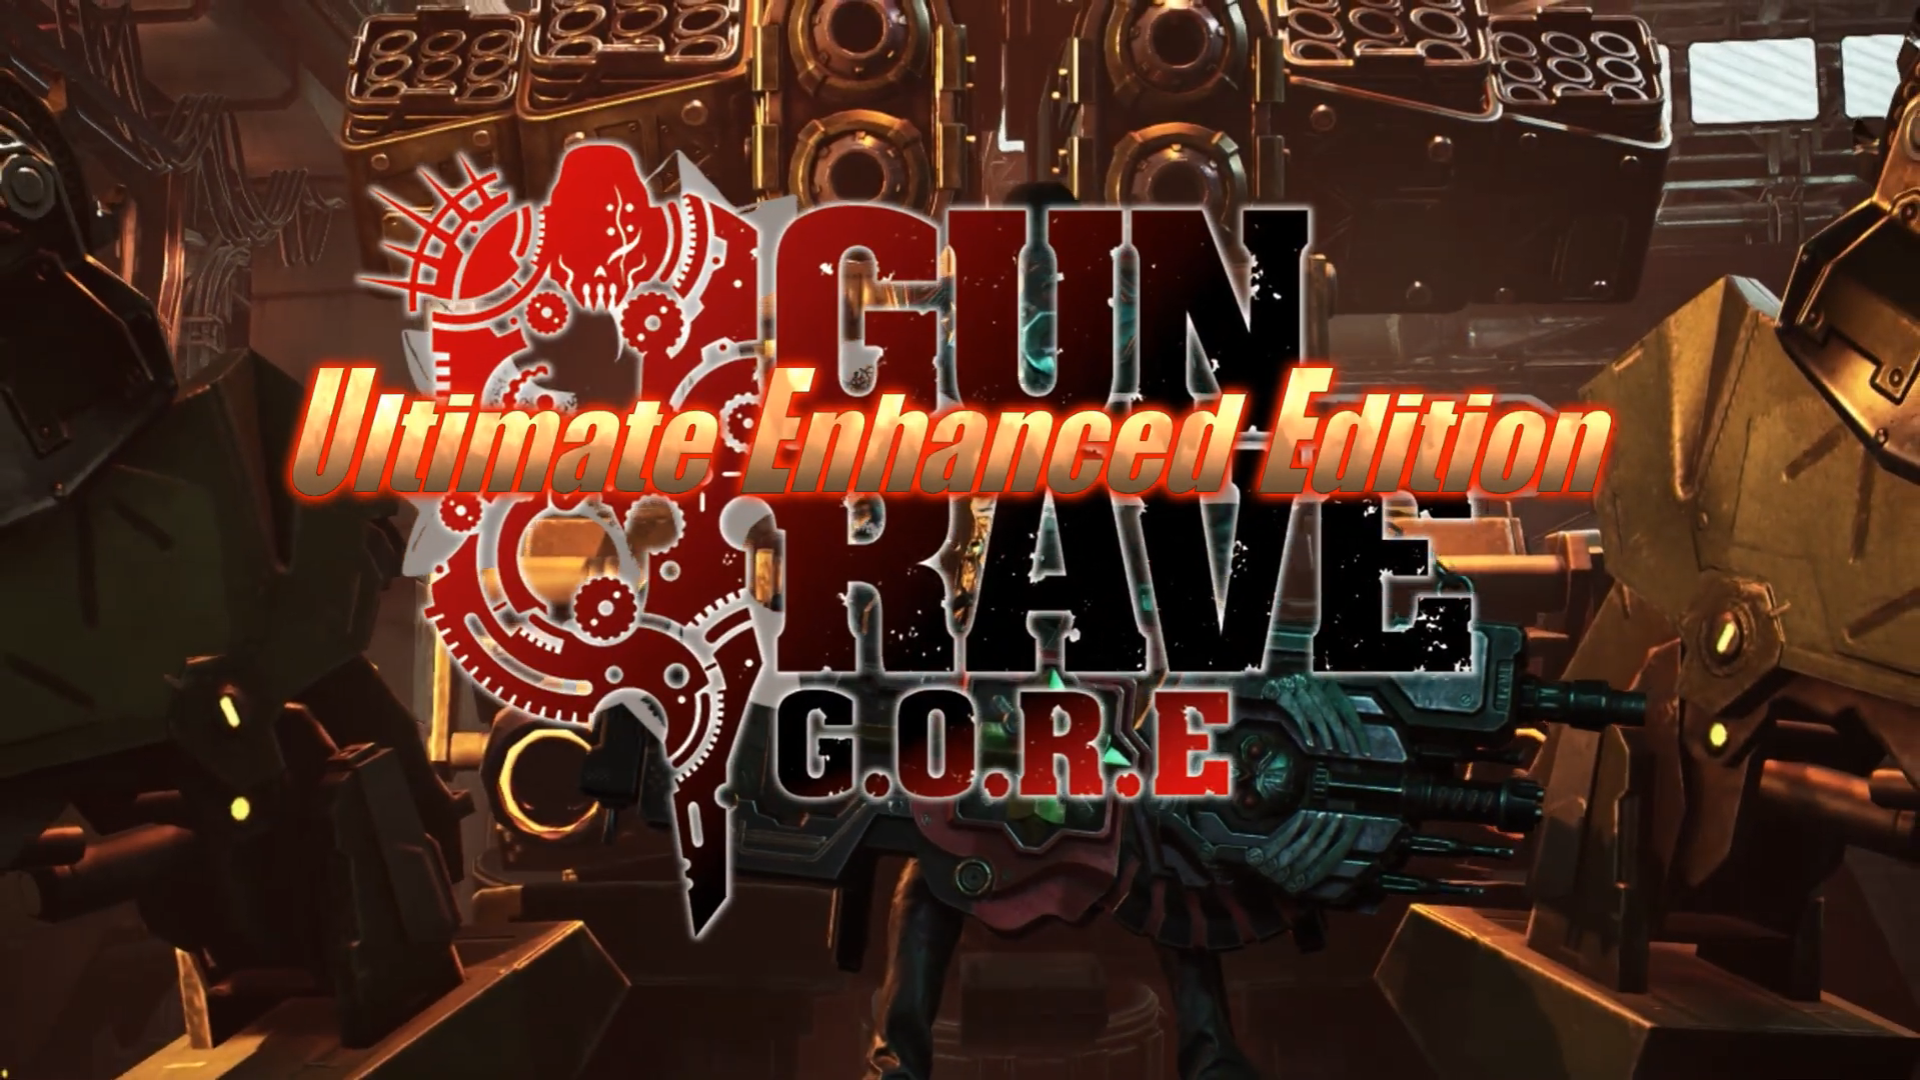 GUNGRAVE GORE Ultimate Enhanced Edition Shares North American Launch Trailer & “5 Interesting Facts”